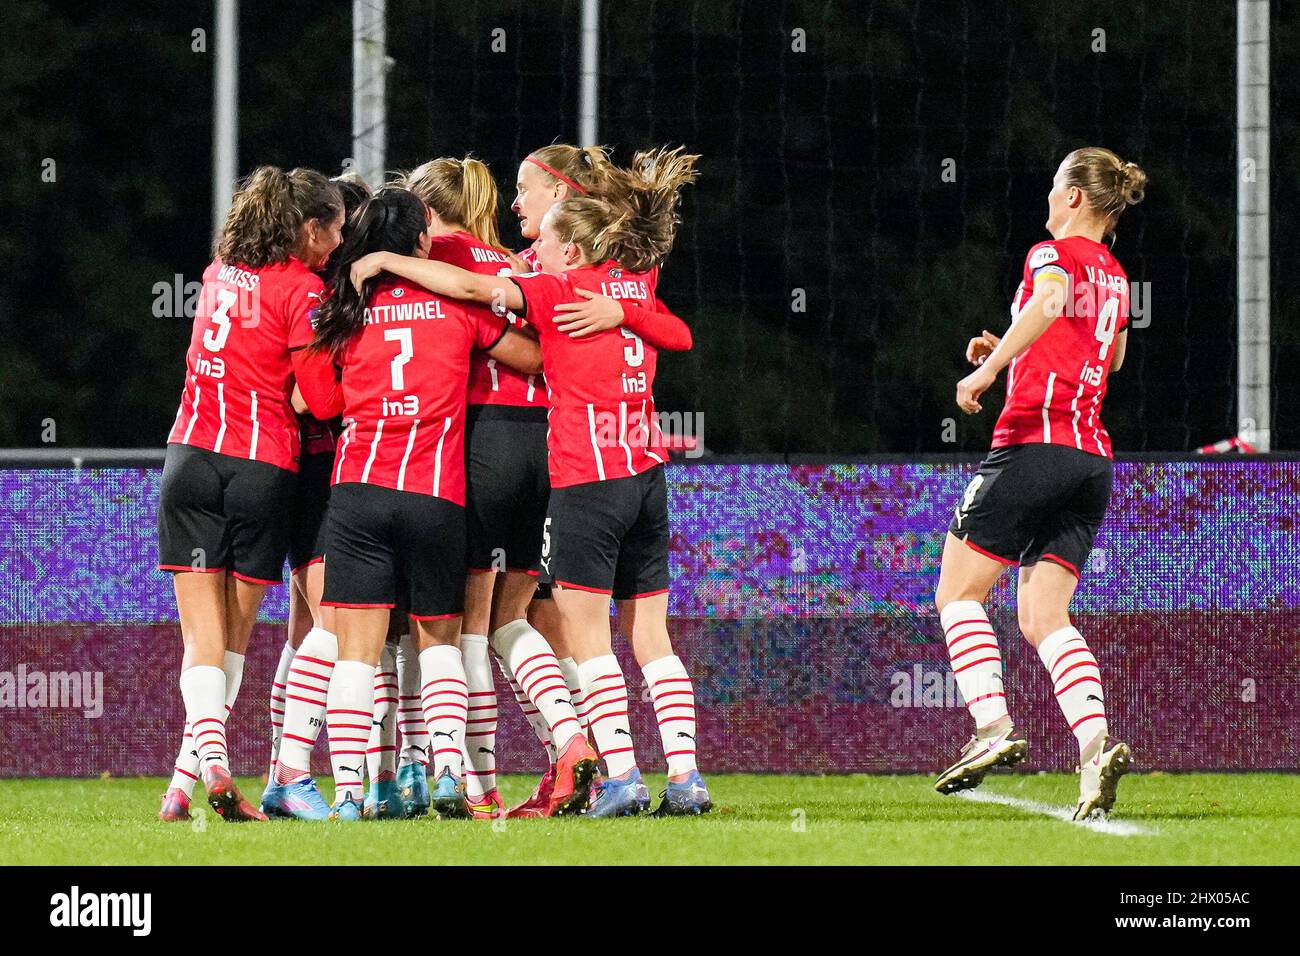 Eindhoven - Desiree van Lunteren van PSV Vrouwen celebrates the 1-0 during the match between PSV V1 v Feyenoord V1 at De Herdgang on 8 March 2022 in Eindhoven, Netherlands. (Box to Box Pictures/Yannick Verhoeven) Stock Photo